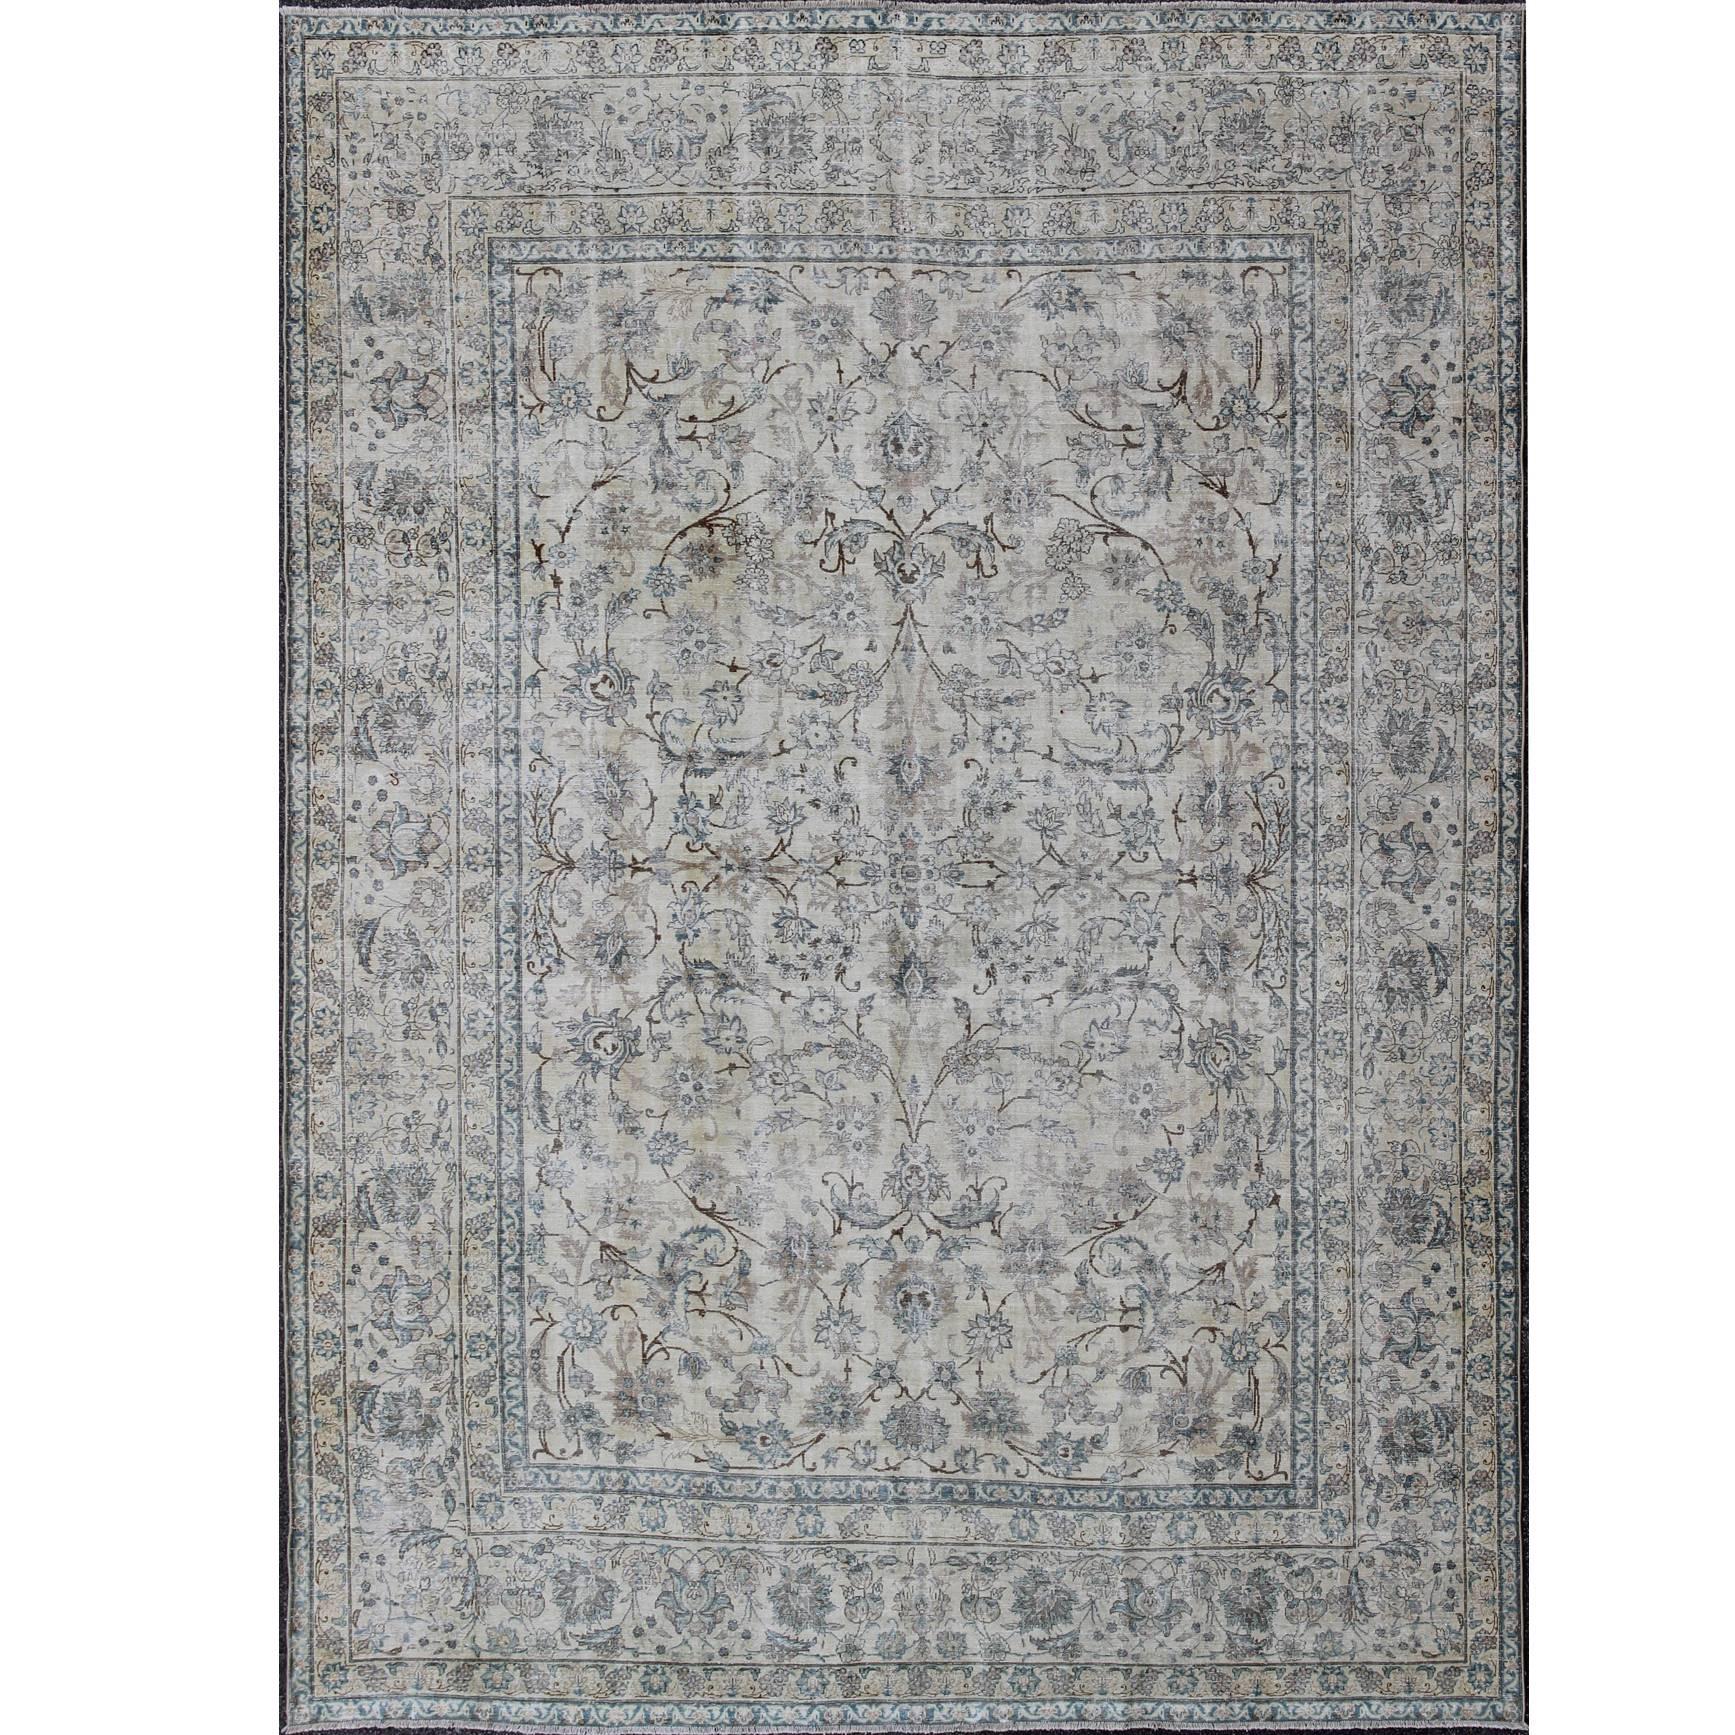 Persian Tabriz Rug with All-Over Floral Design